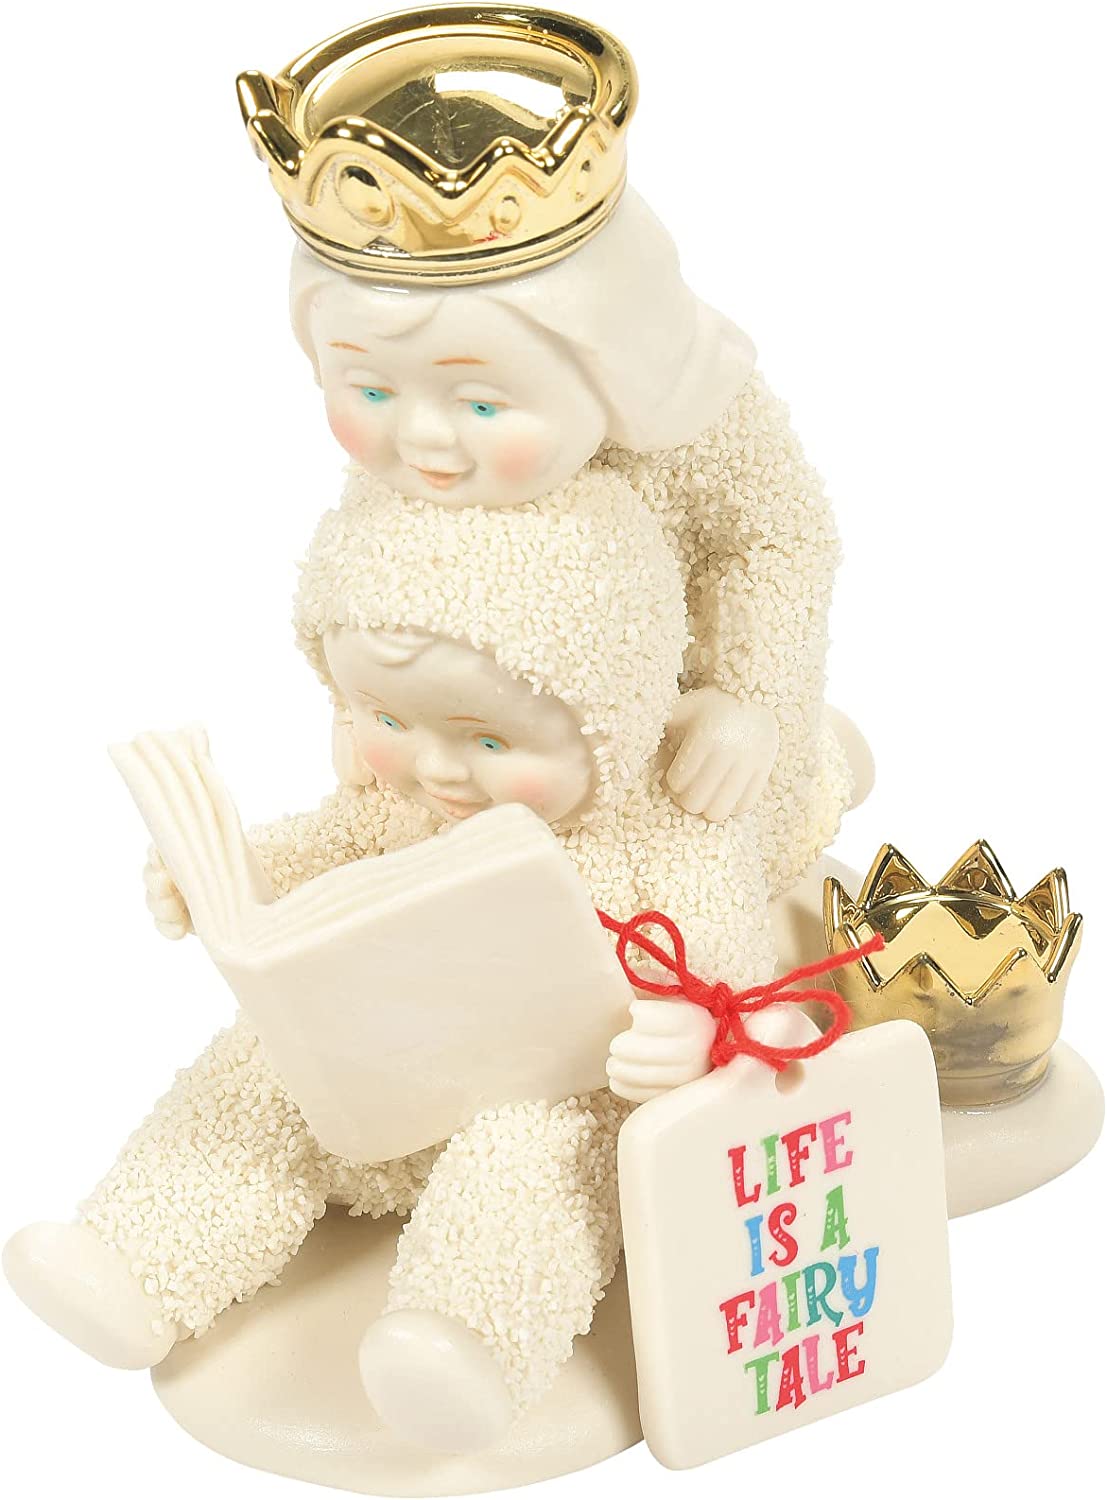 Department 56 Snowbabies Awesome Life is a Fairytale Figurine